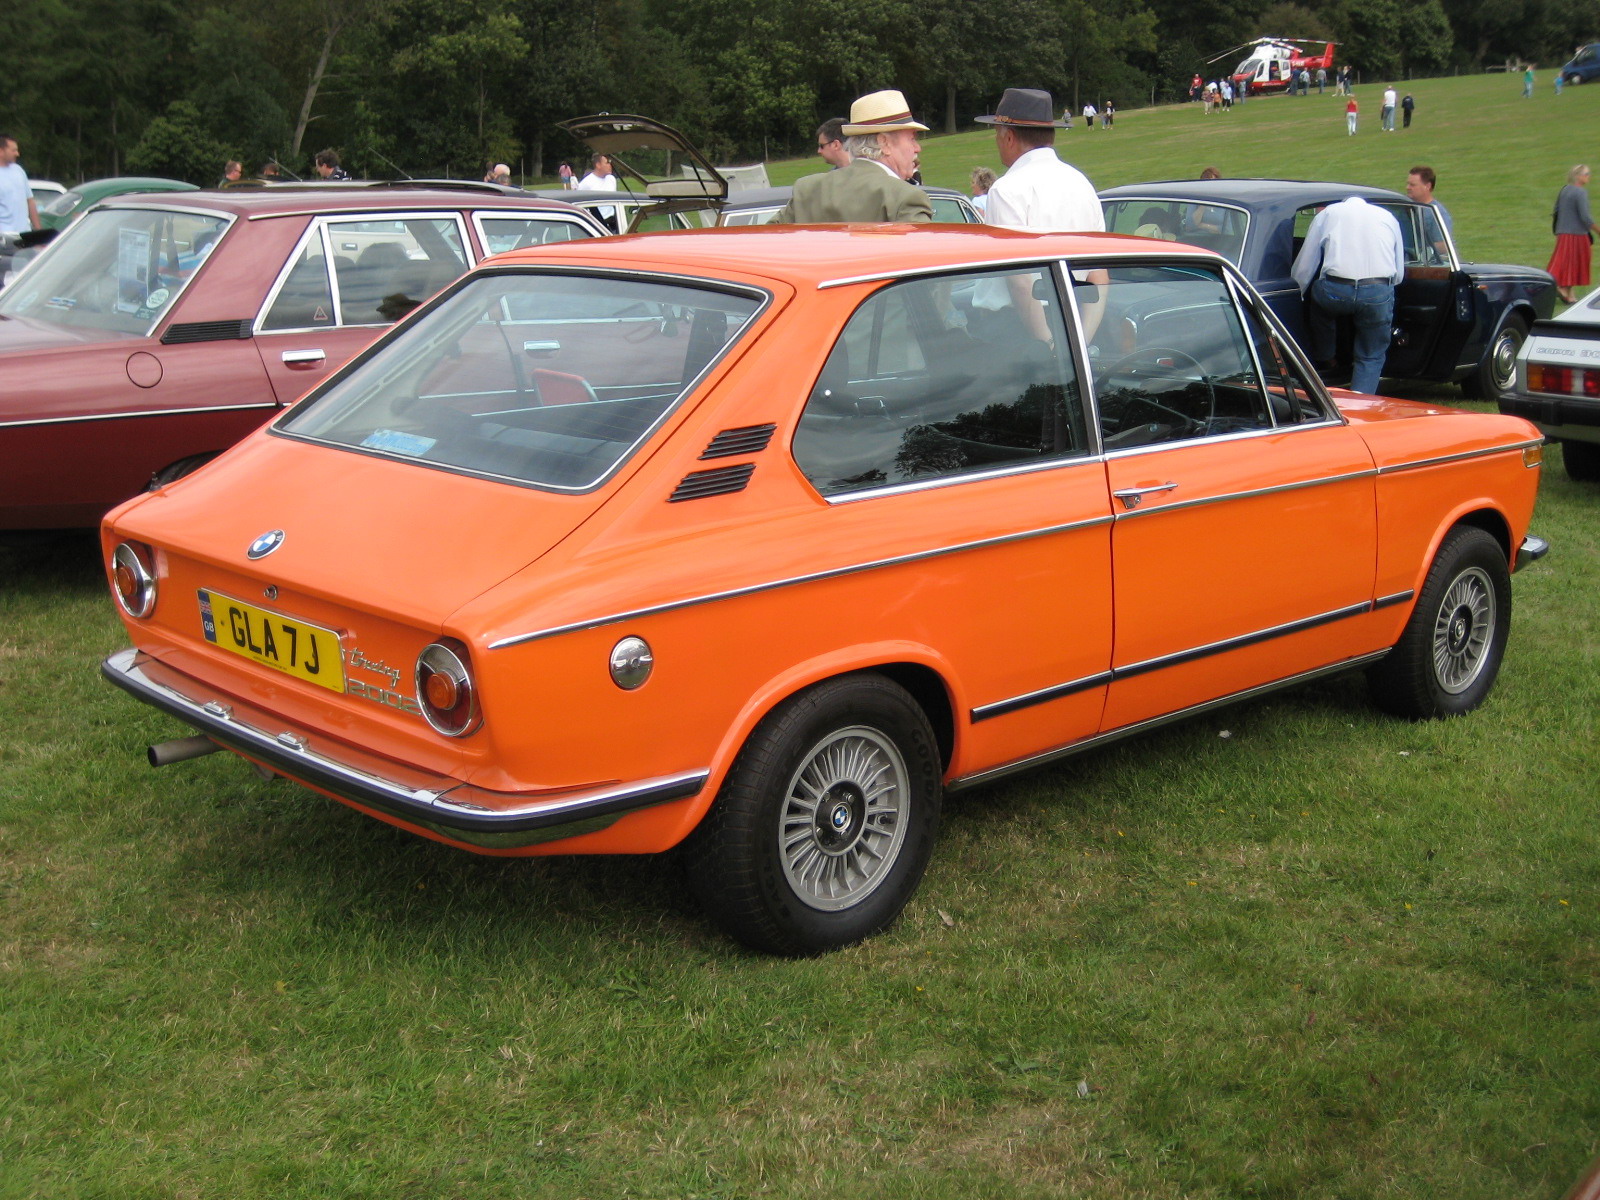 BMW 2002 Touring | Flickr - Photo Sharing!